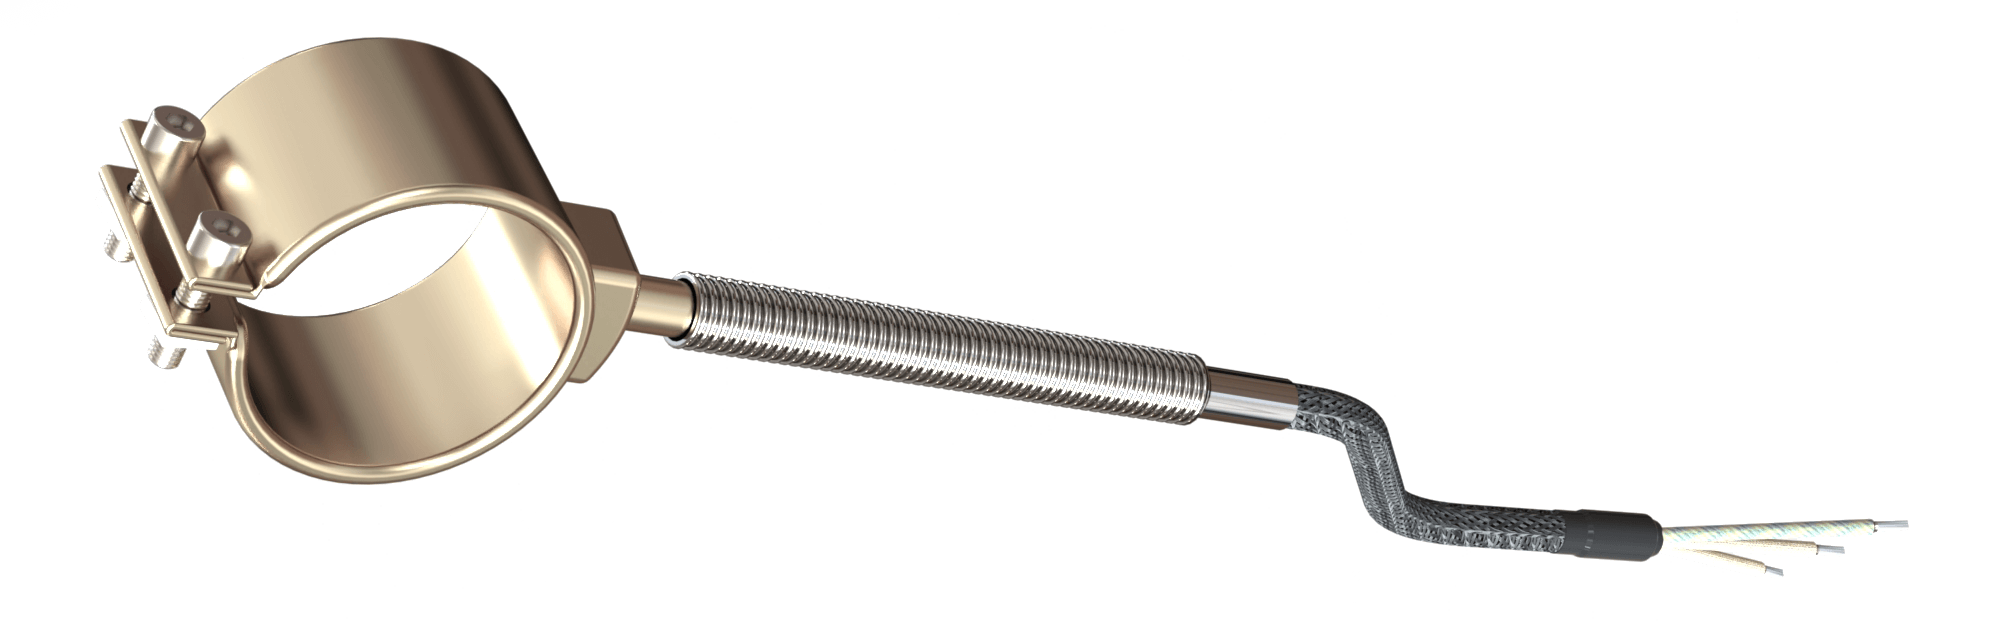 Standard Nozzle Band Heaters in stainless steel and brass, for temperatures up to 280°C/350°C, injection molding, holes, cutouts, thermocouple connector or separate leaf sensor, original accessories on all common machine types